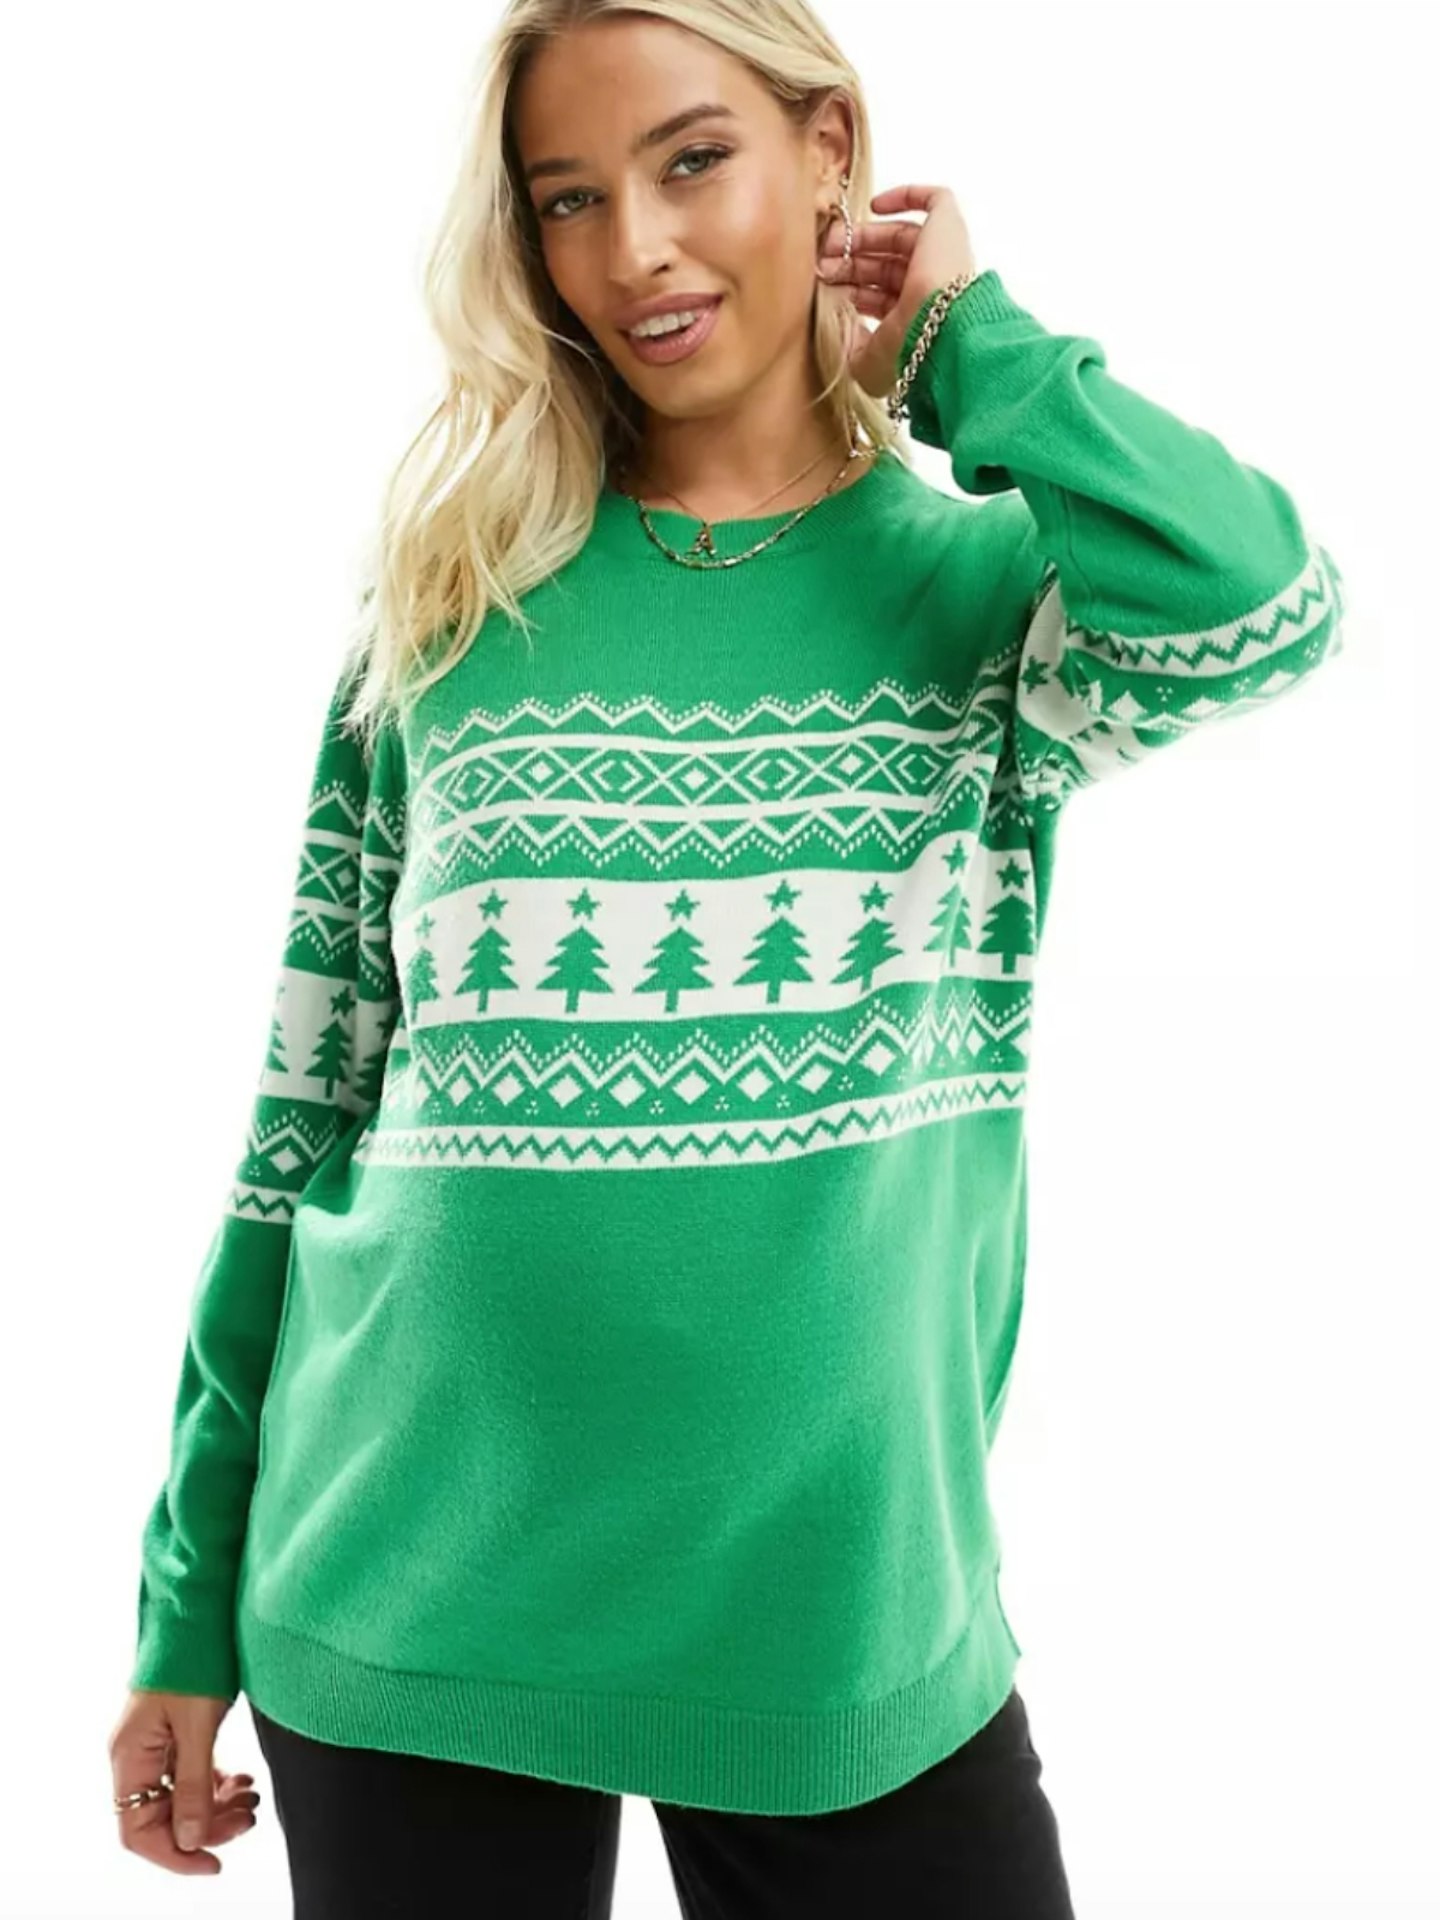 ASOS DESIGN Maternity Christmas Jumper with Placement Fairisle Pattern in Green